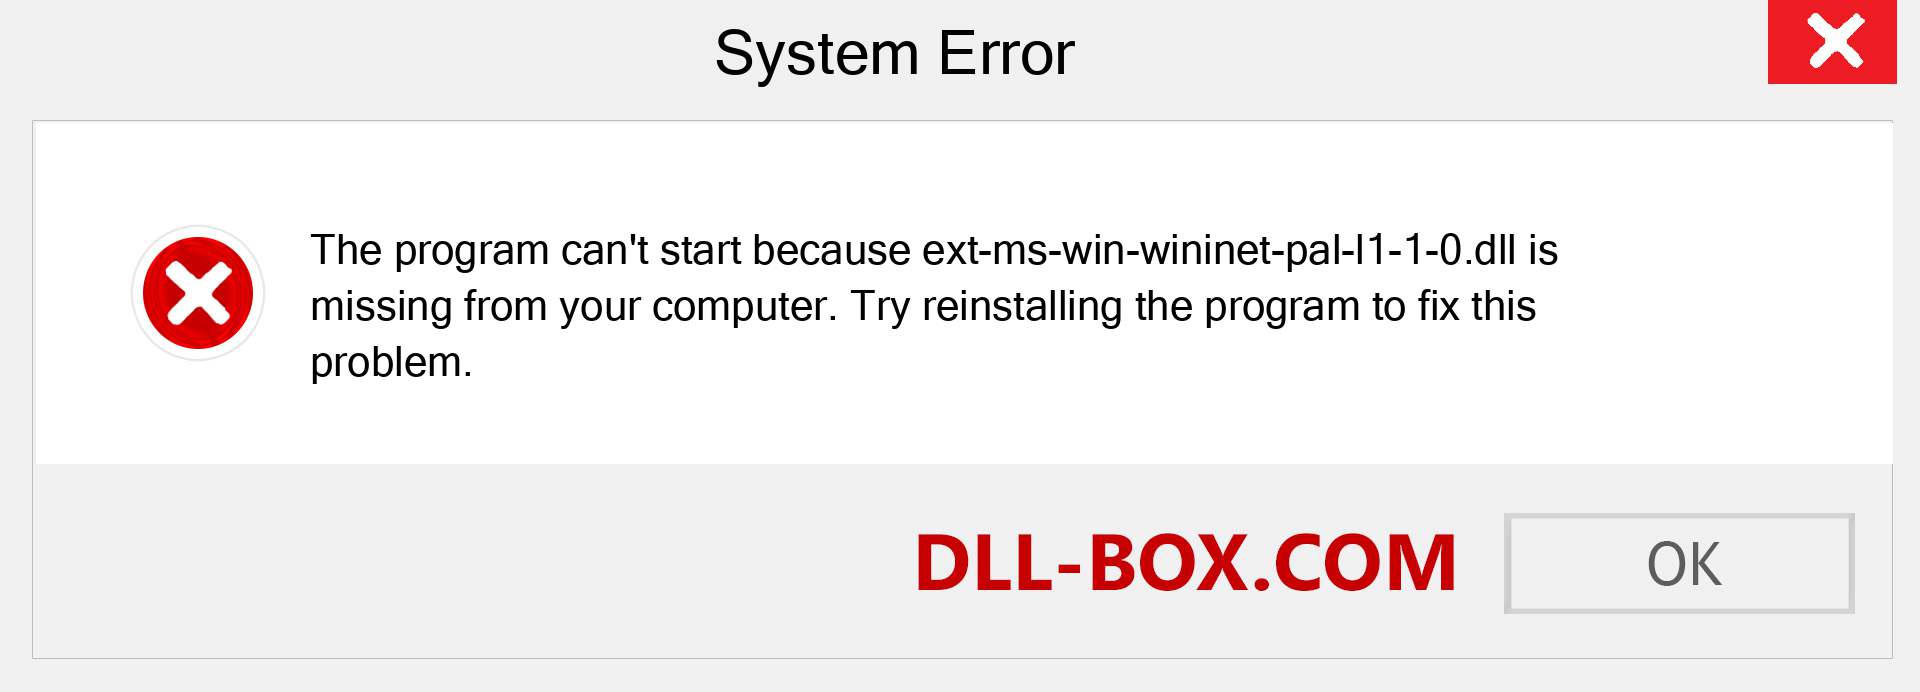  ext-ms-win-wininet-pal-l1-1-0.dll file is missing?. Download for Windows 7, 8, 10 - Fix  ext-ms-win-wininet-pal-l1-1-0 dll Missing Error on Windows, photos, images